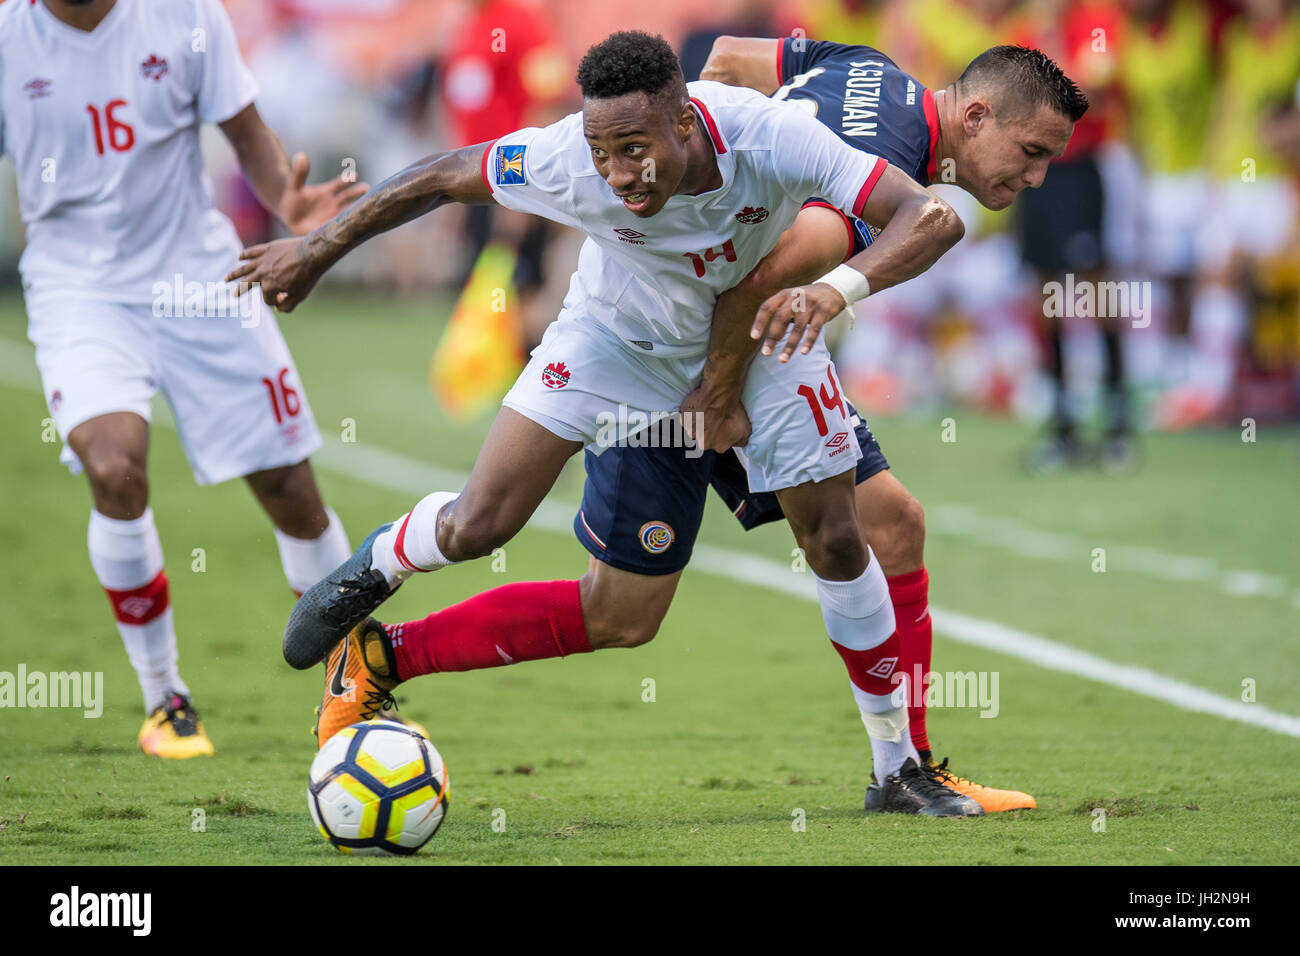 Houston, Texas, USA. 11th July, 2017. Canada midfielder MARK-ANTHONY KAYE (14) and Costa Rica midfielder DAVID GUZMAN (20) battle for the ball during the 1st half of an international CONCACAF Gold Cup soccer match between Canada and Costa Rica at BBVA Compass Stadium. The game ended in a 1-1 draw. Credit: Trask Smith/ZUMA Wire/Alamy Live News Stock Photo